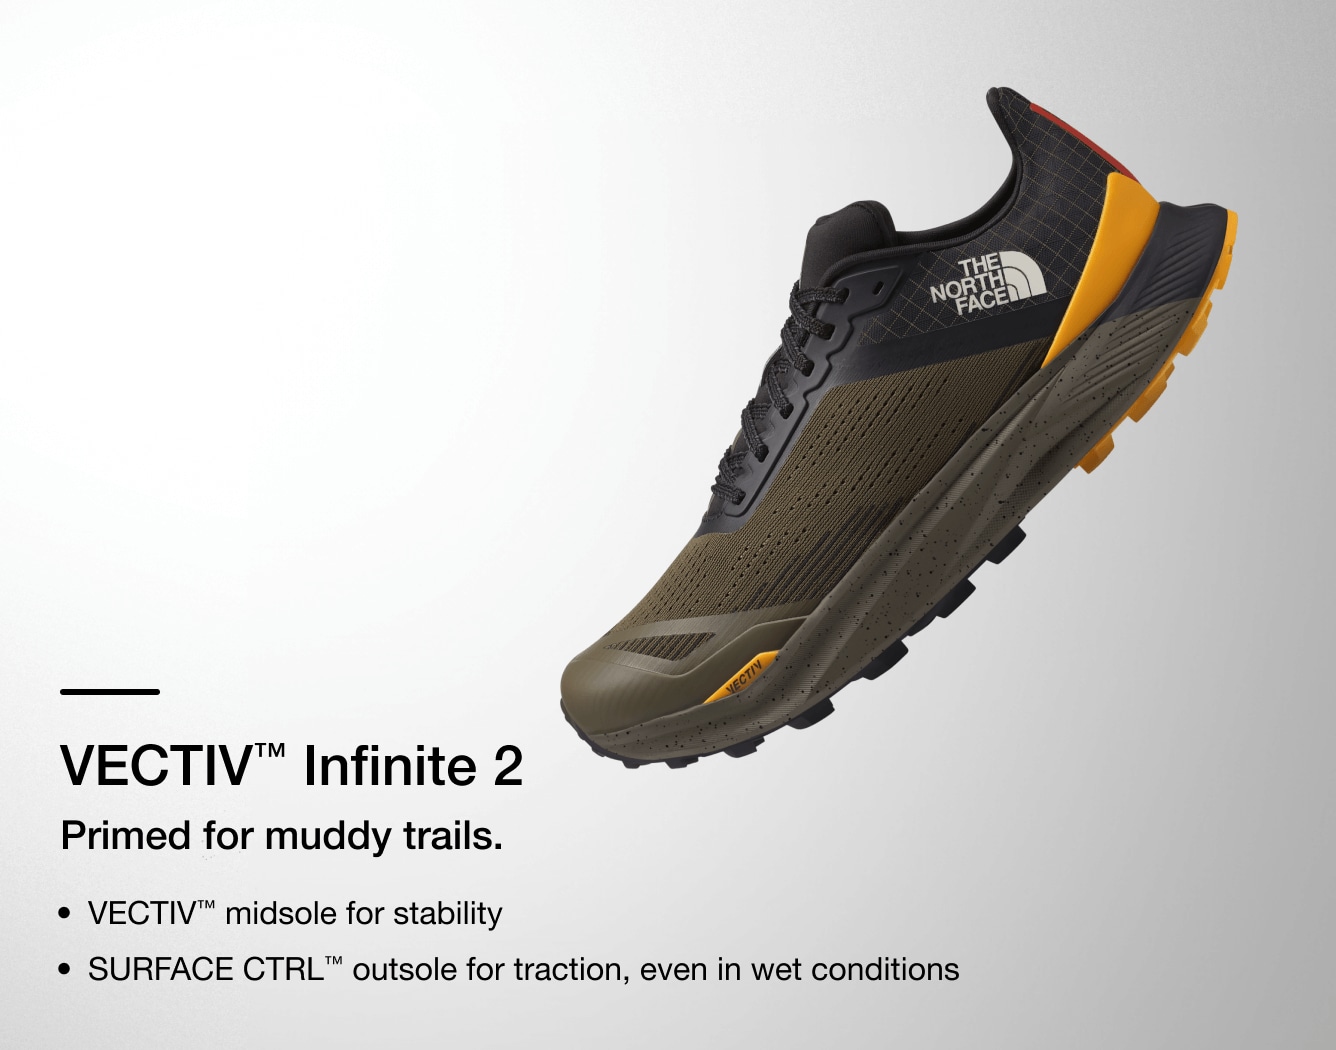 Studio shot of the VECTIV Infinite trail running shoe from The North Face with text overlay detailing features.